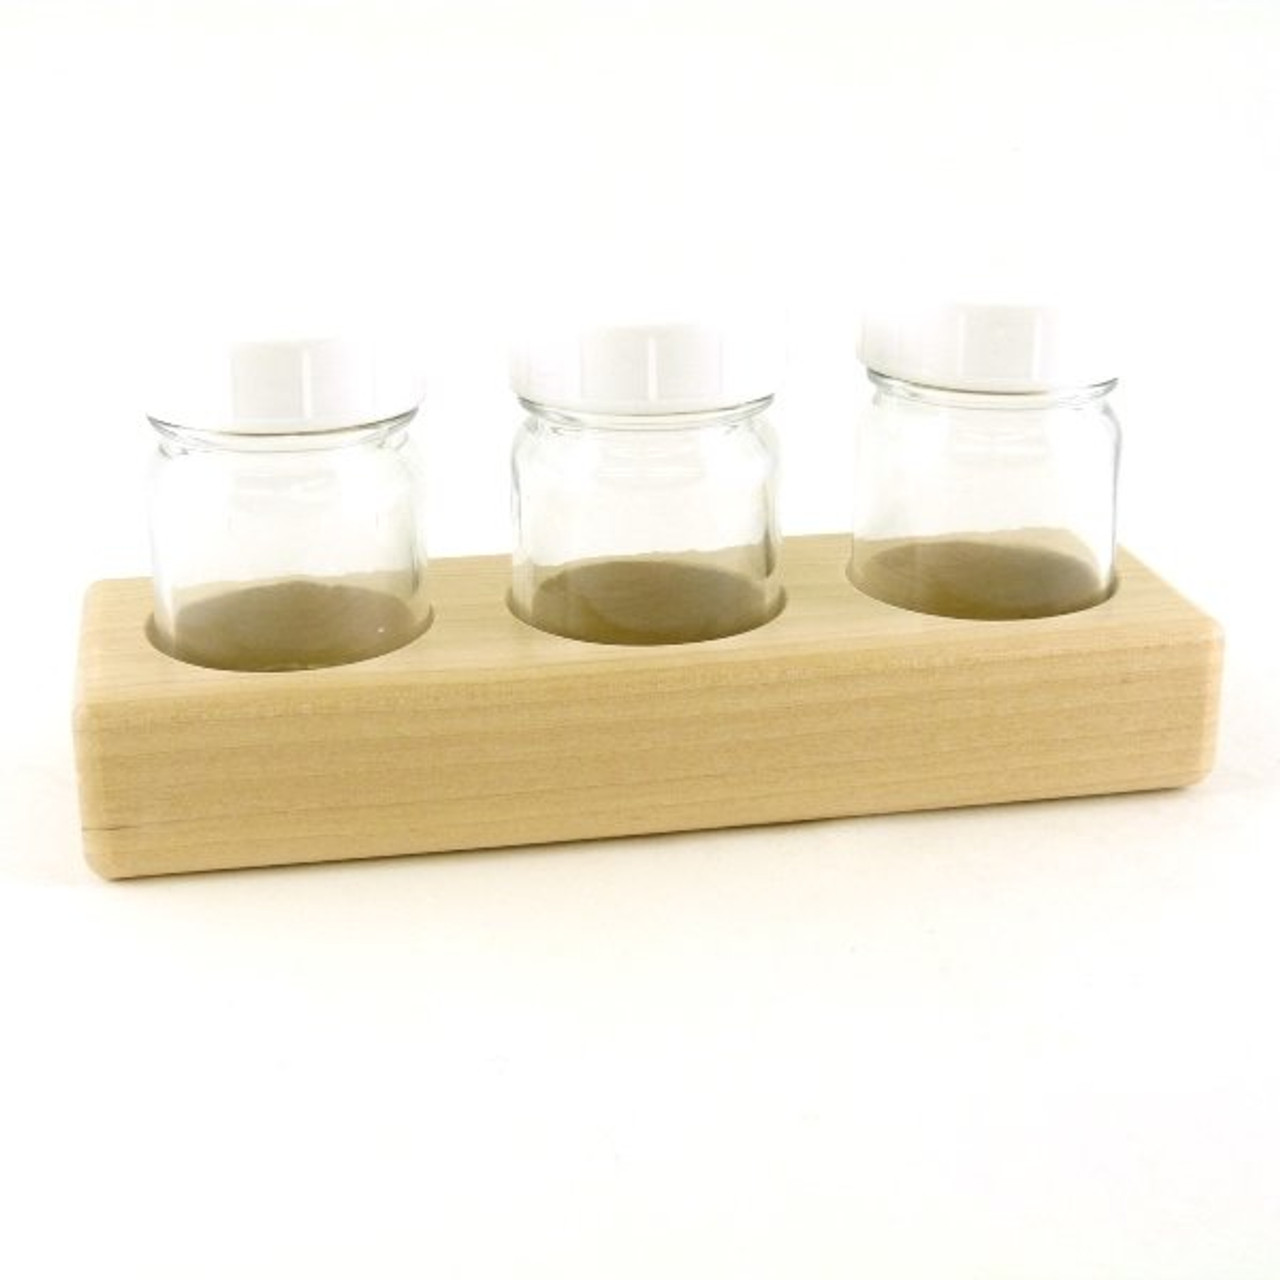 Wooden Holder for Three Paint Jars